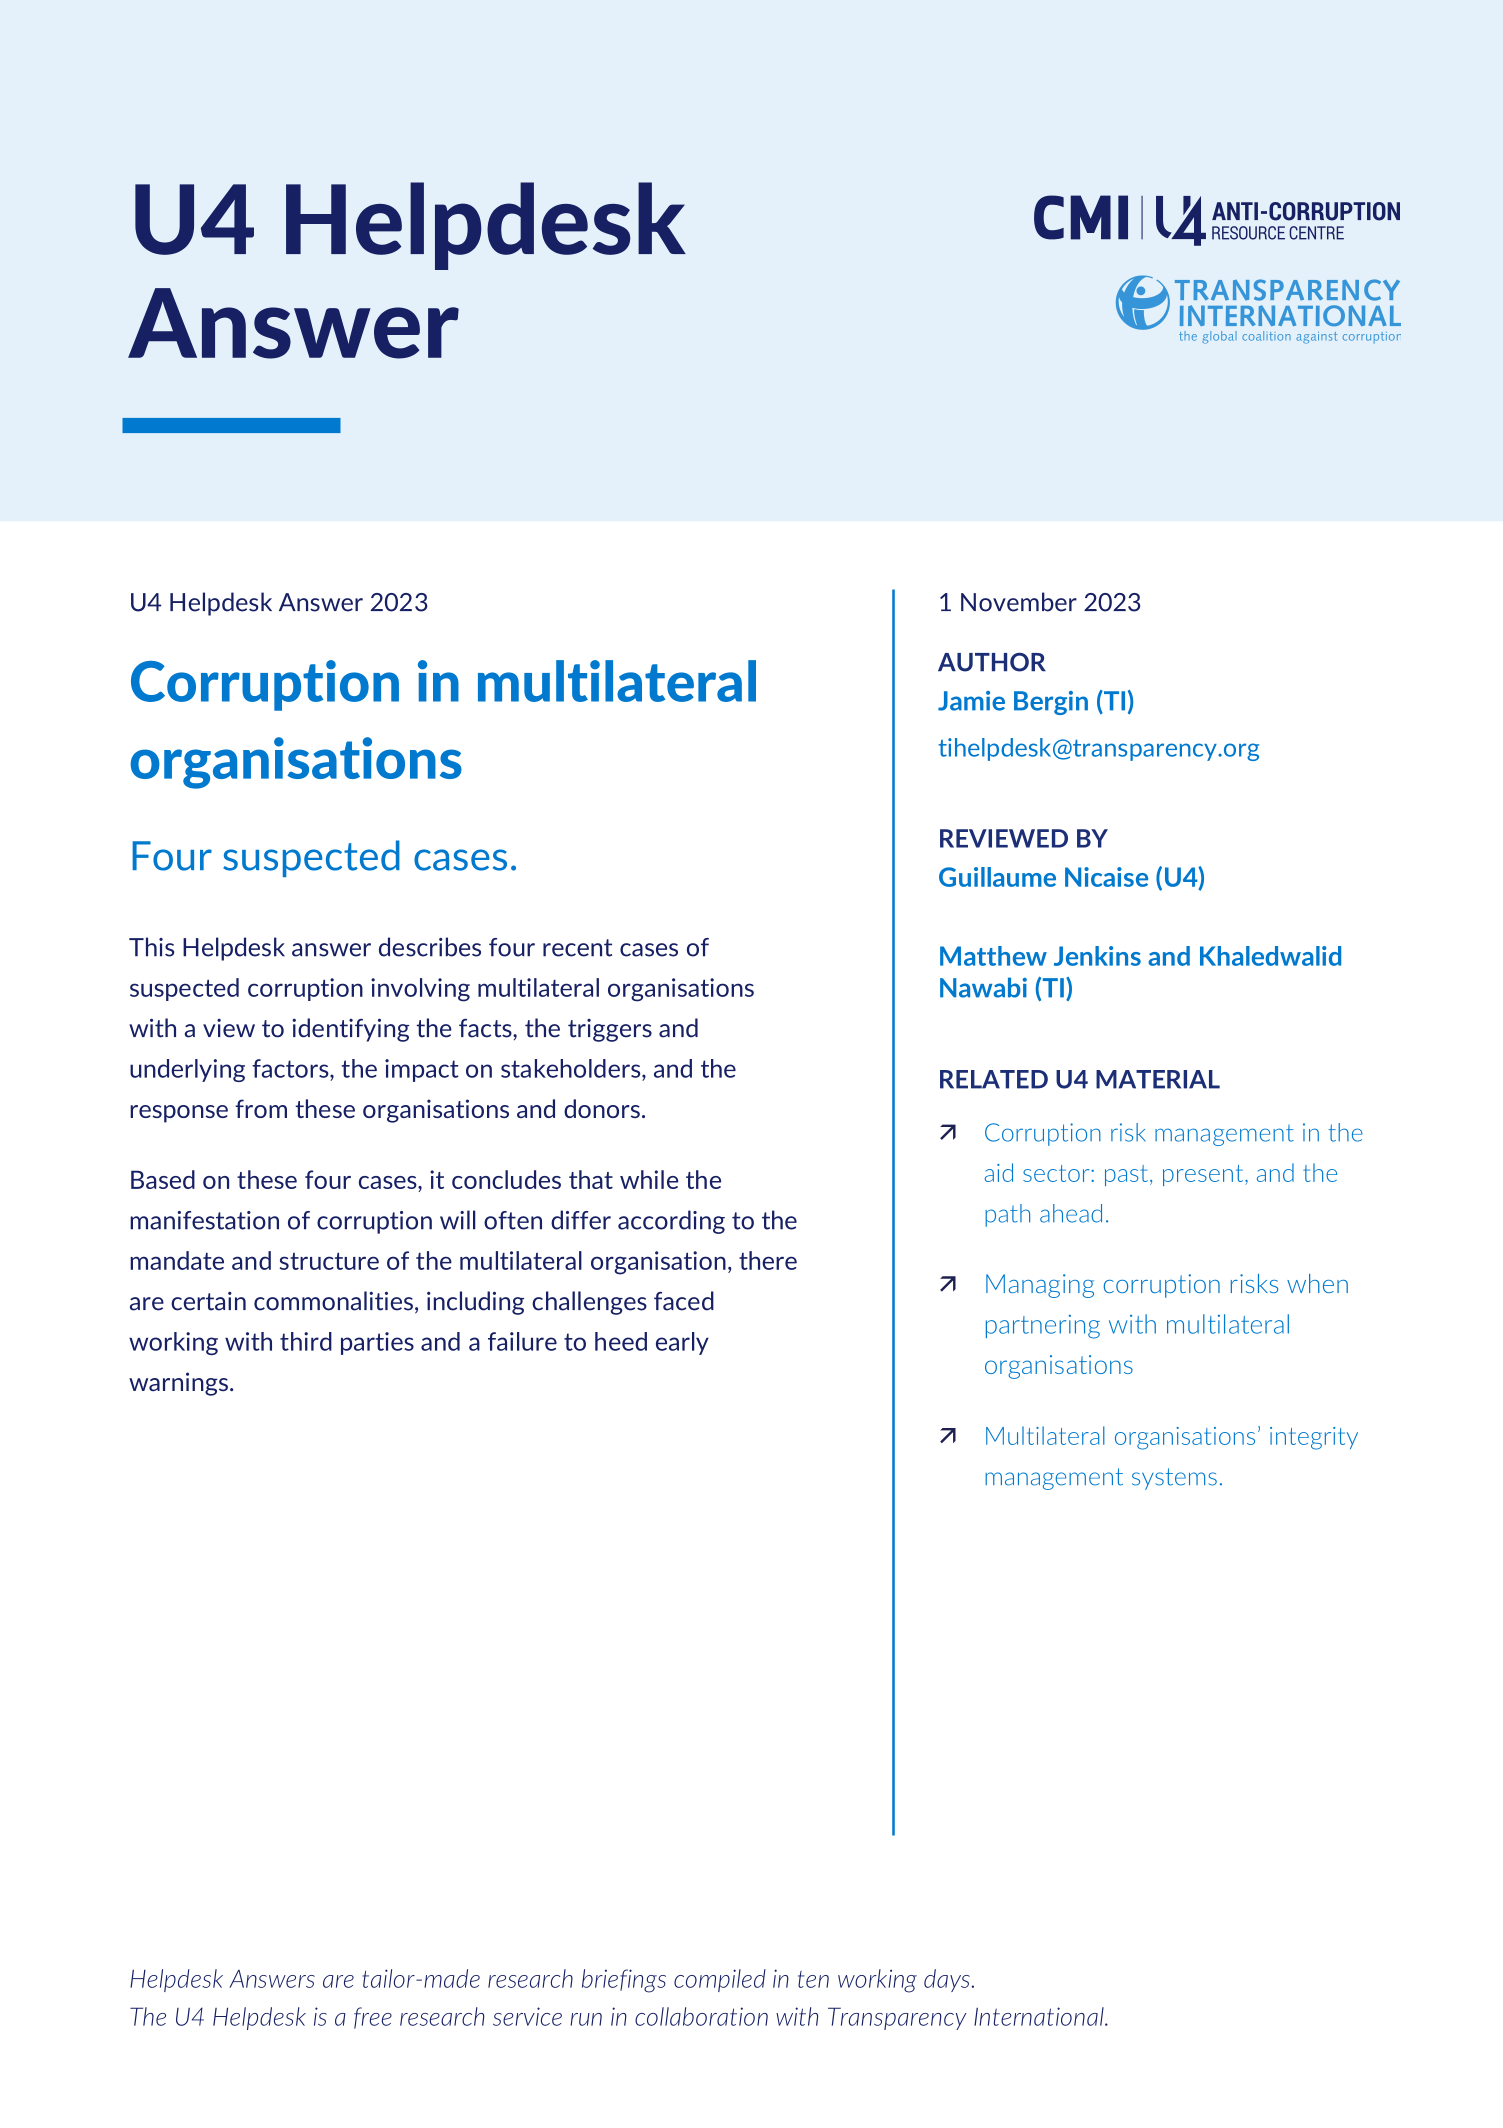 Corruption cases within multilateral organisations